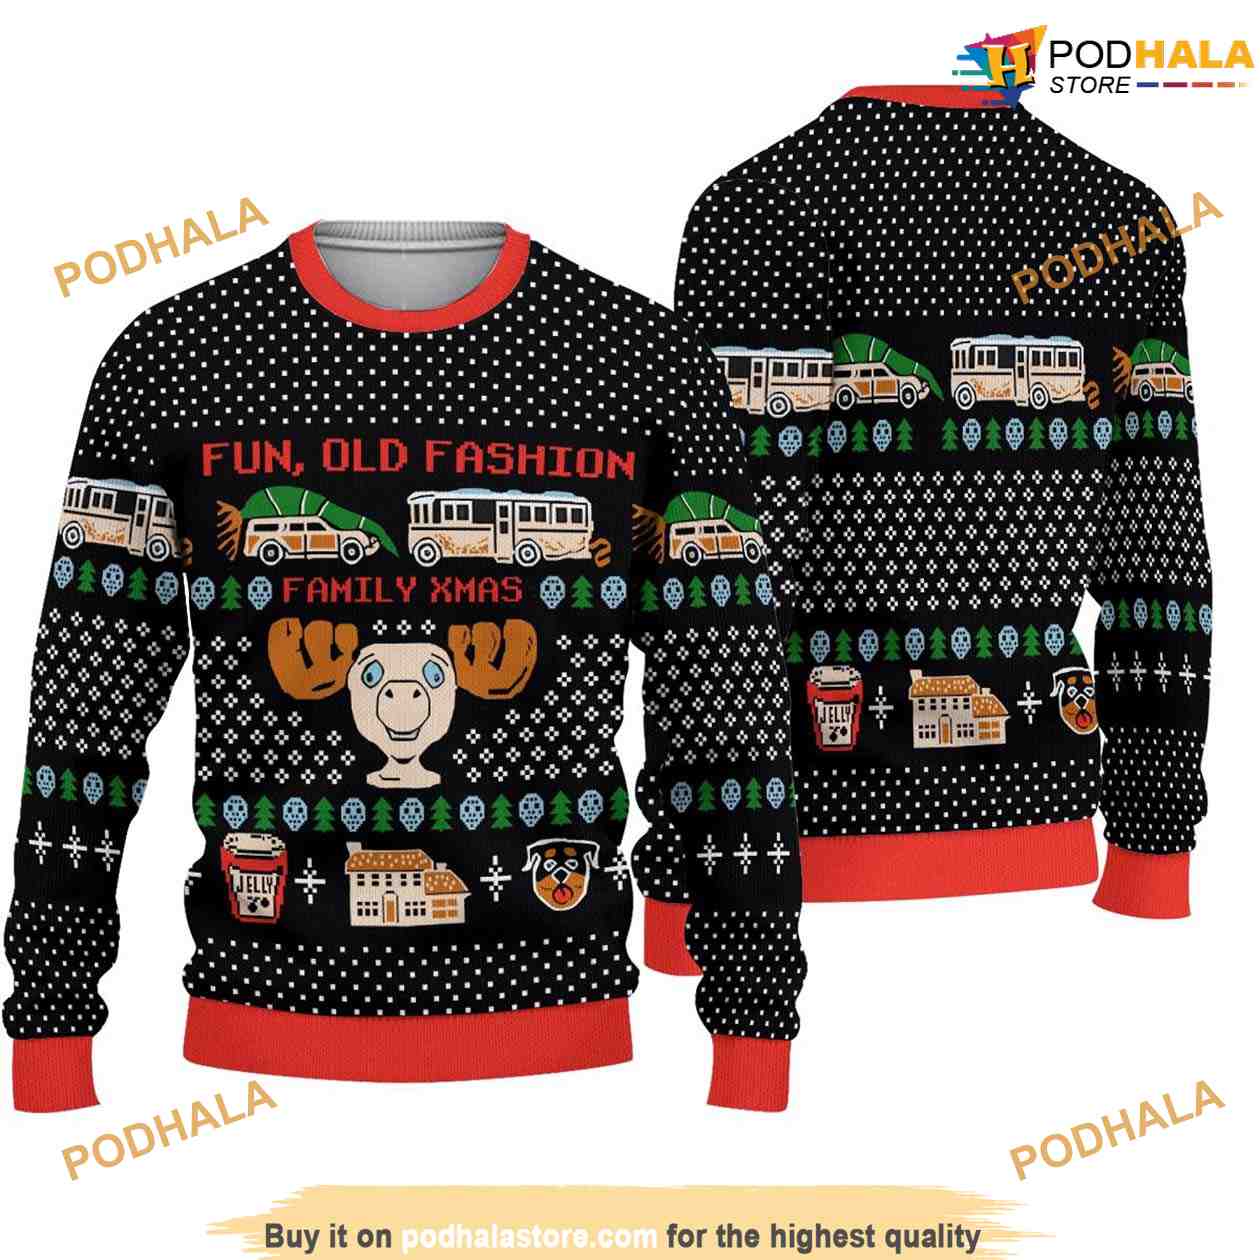 Movie Baseball Jersey Clark Griswold Christmas Vacation Black